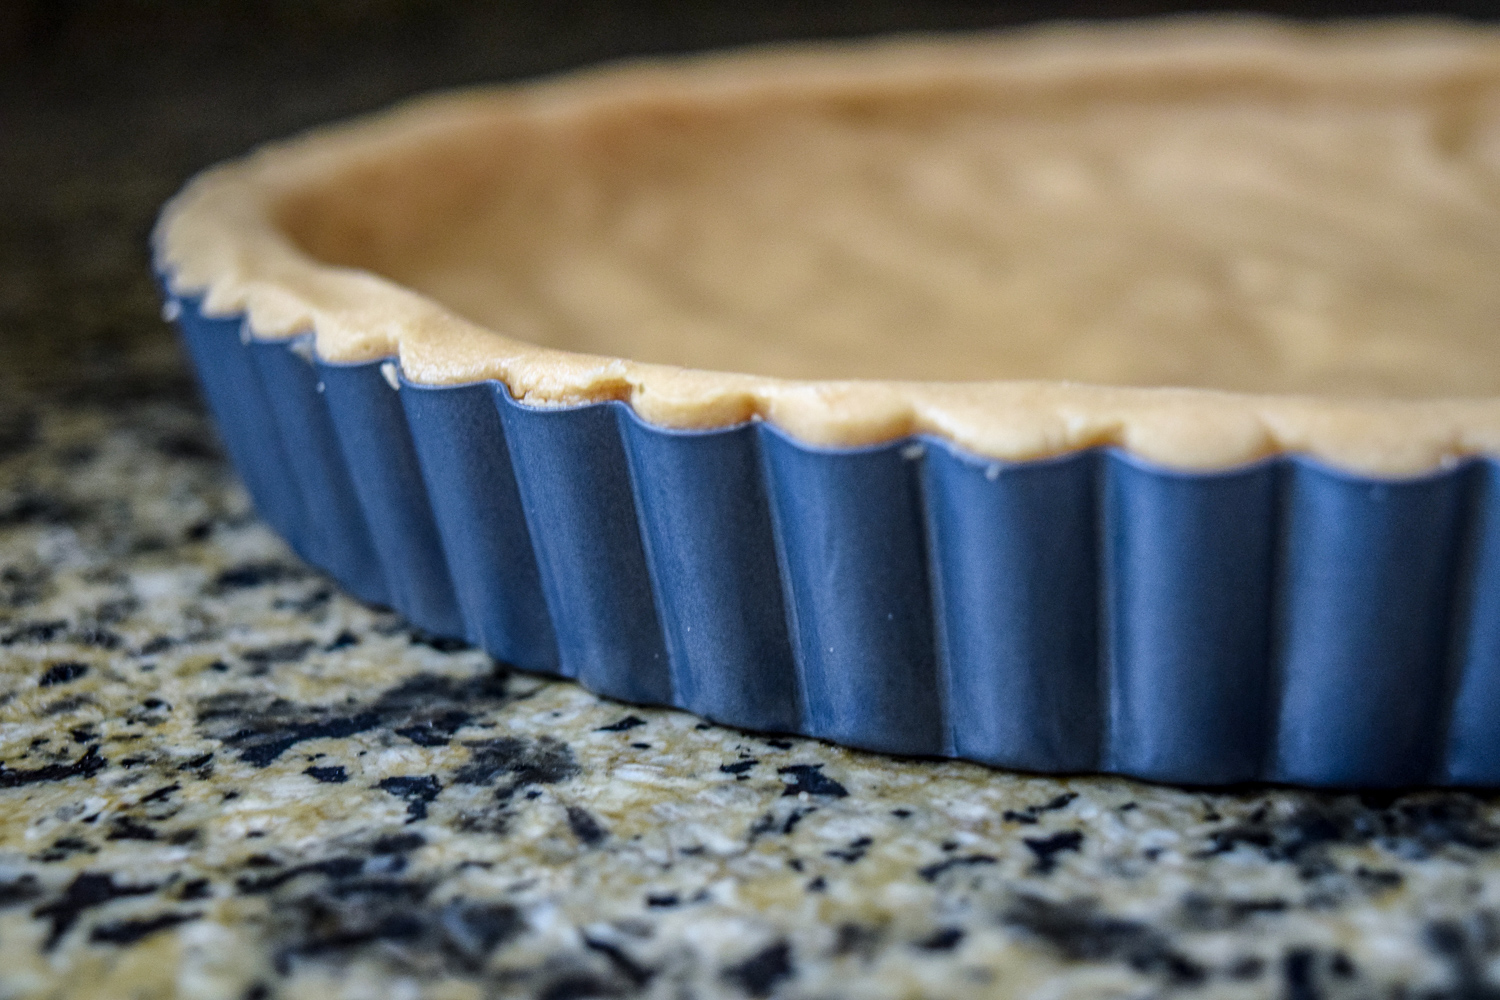 Shortbread dough pressed into tart pan from side up close